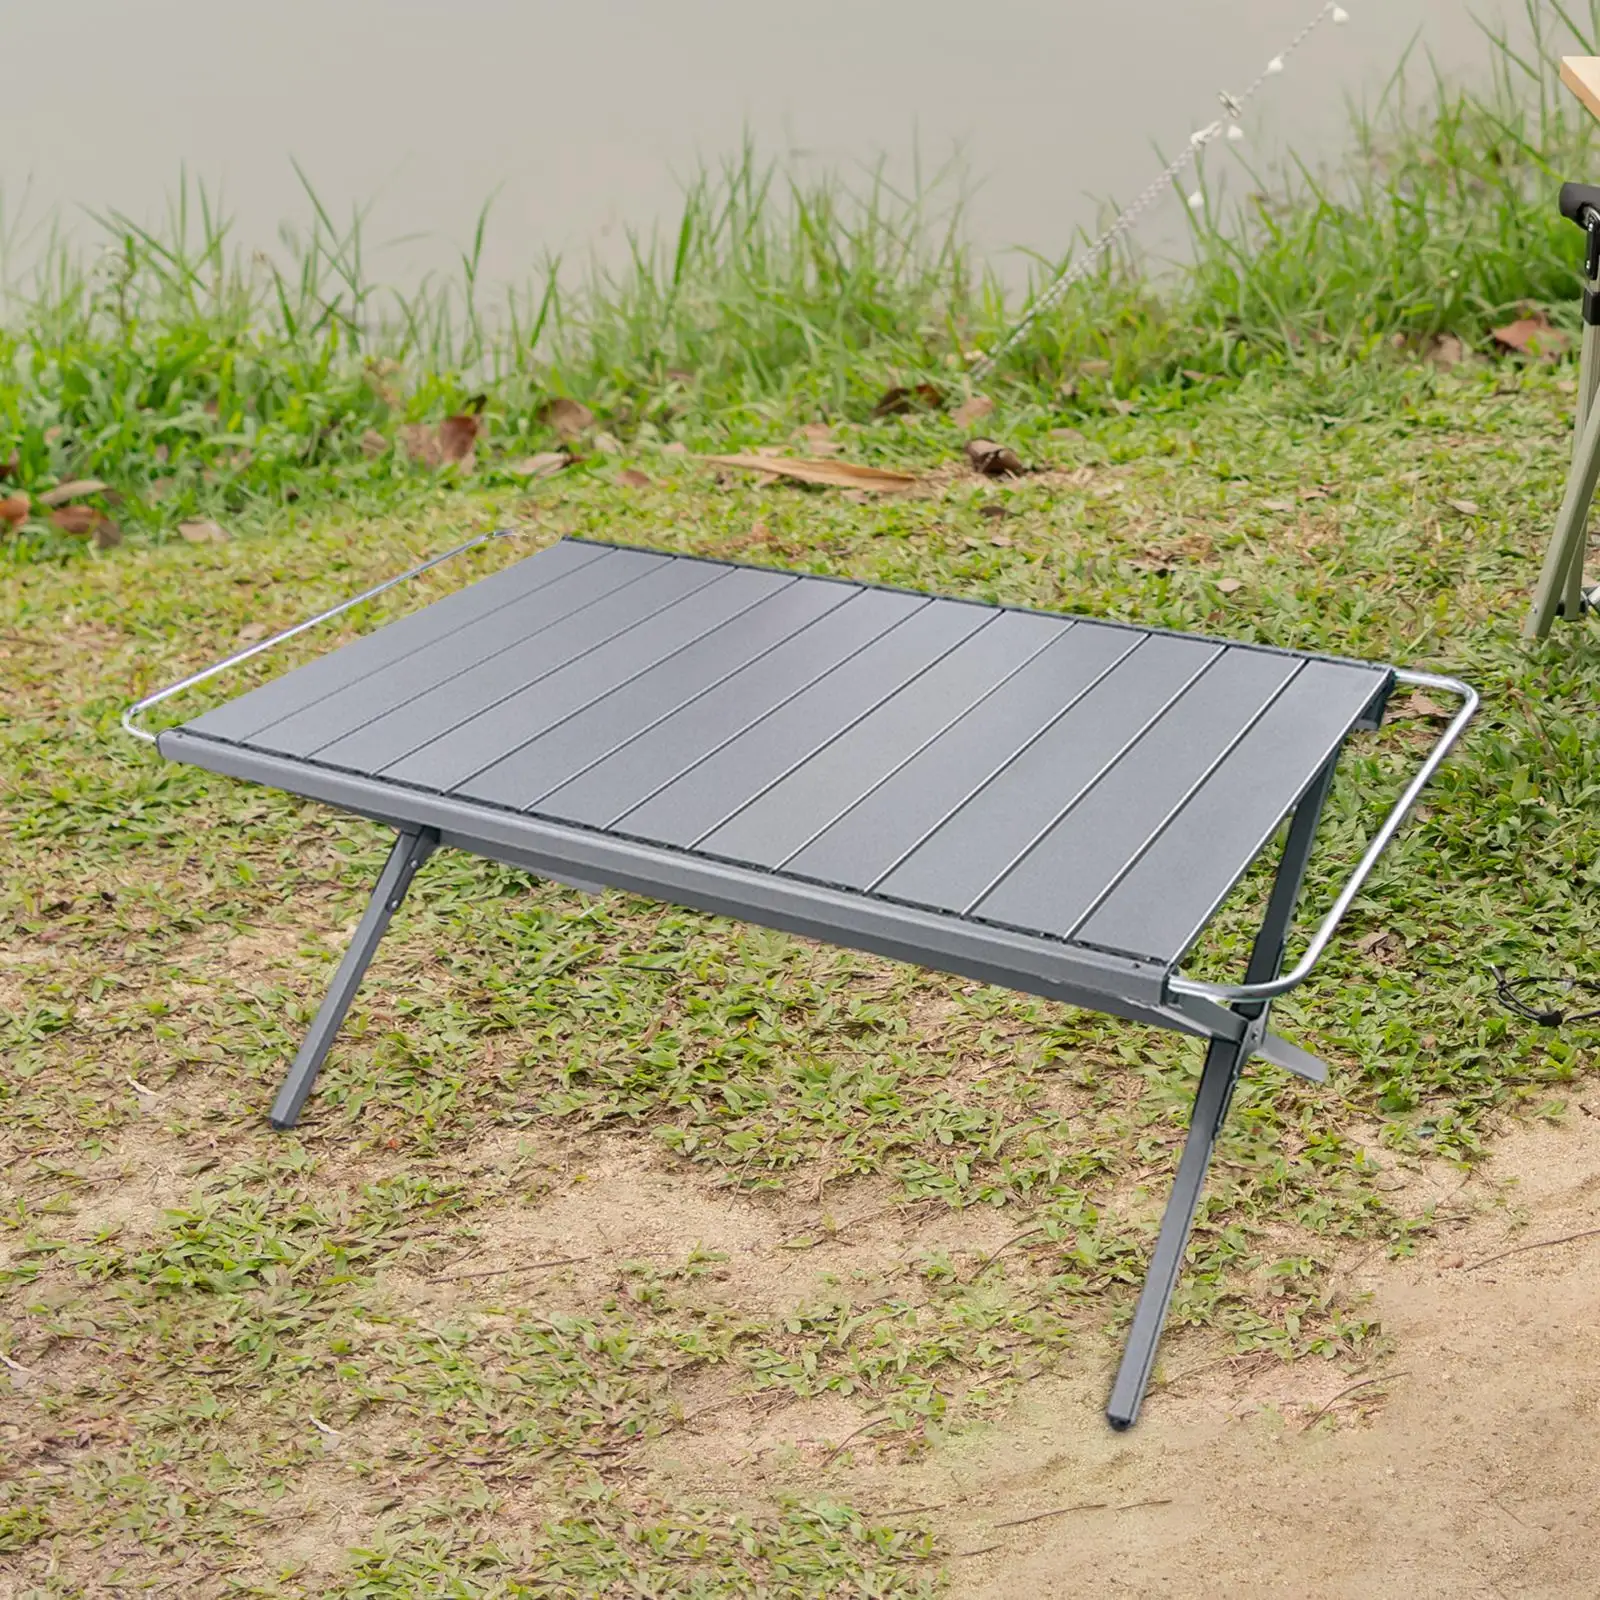 Folding Camping Table Aluminum Alloy Ultralight with Storage Bag Foldable Picnic